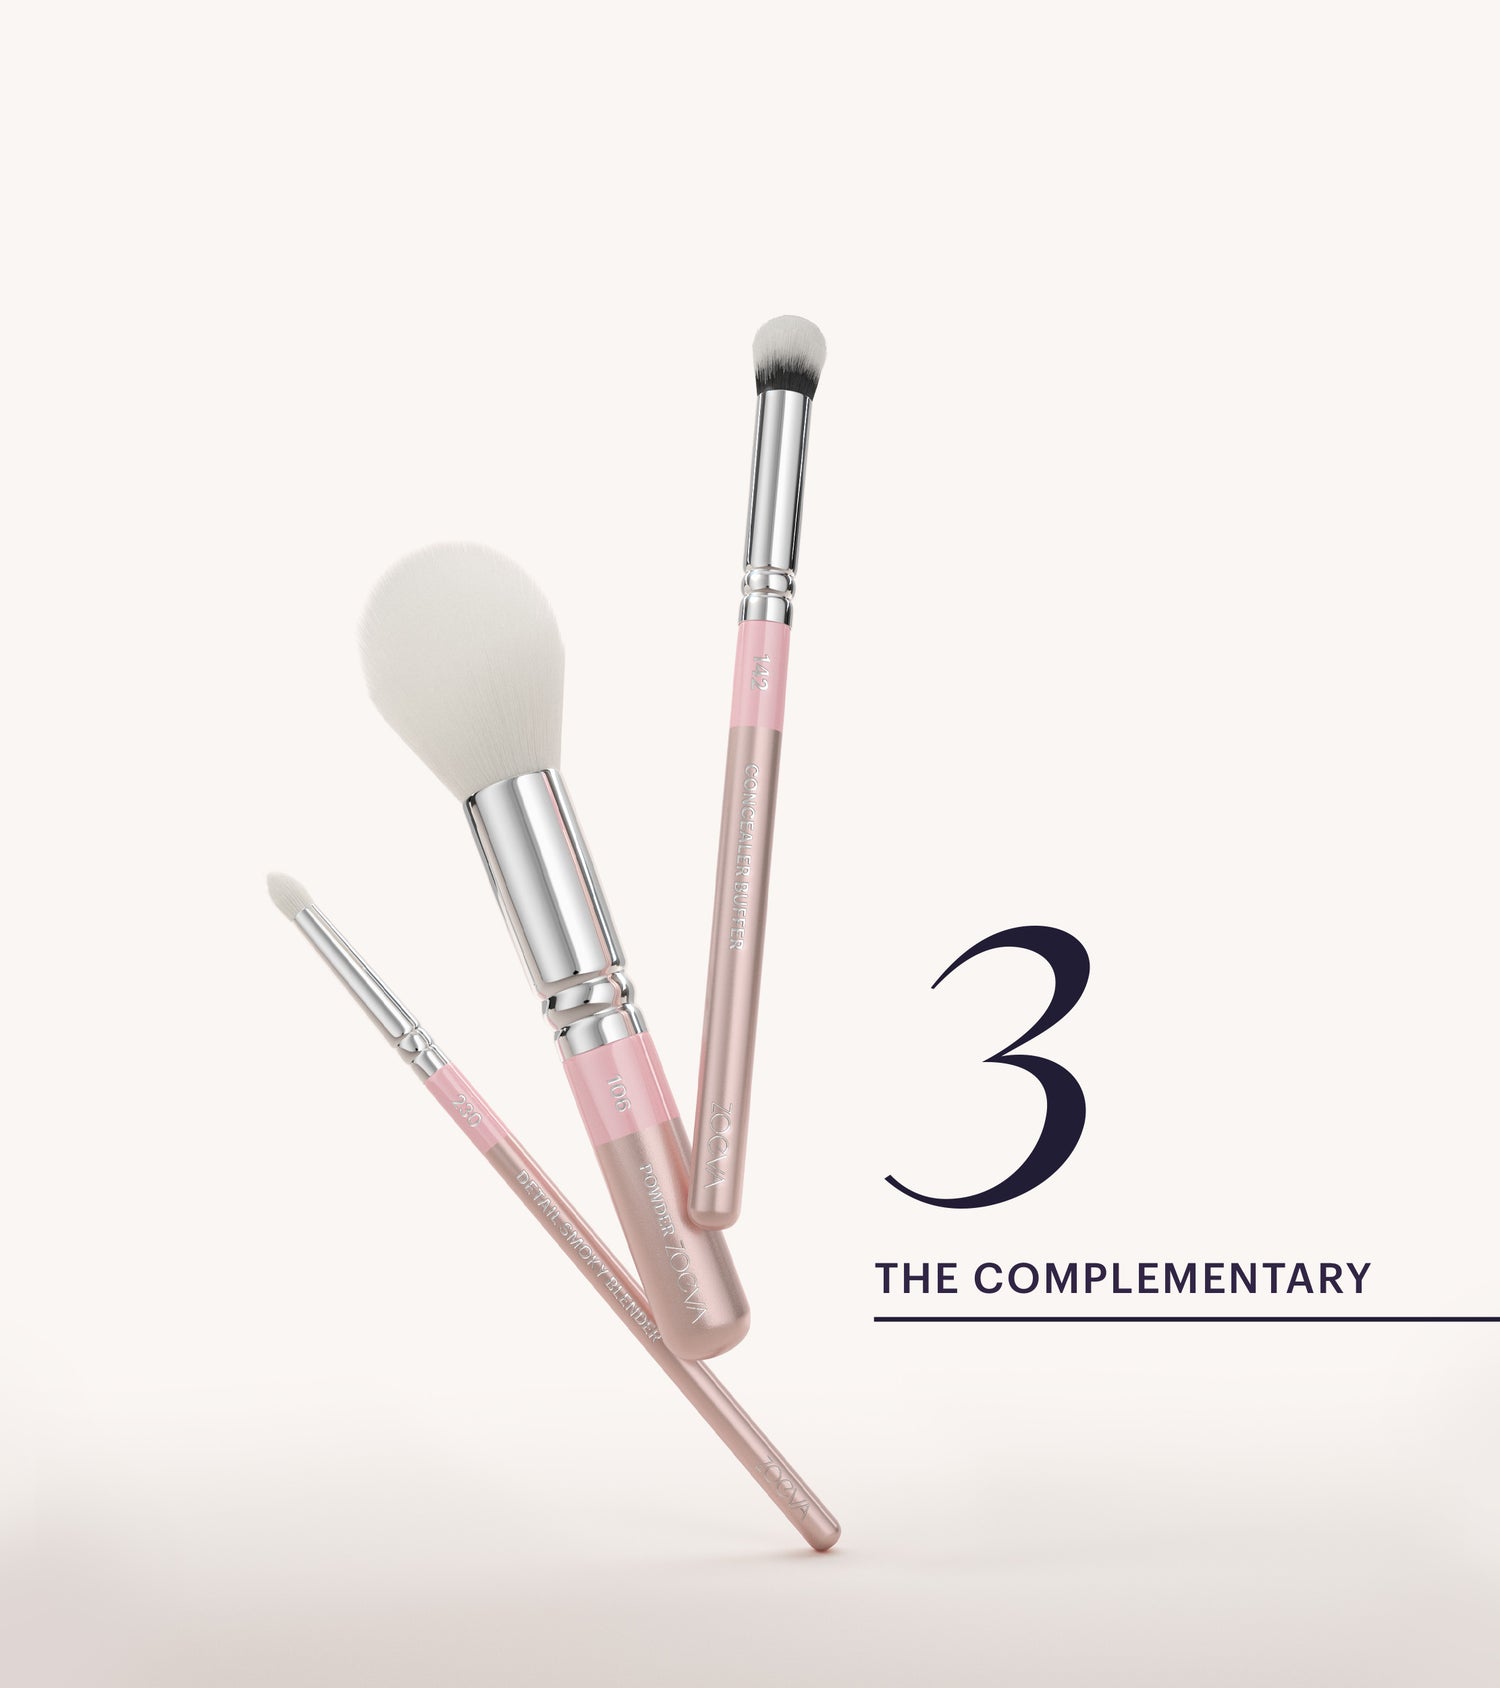 The Artists Brush Set (Dusty Rose) Main Image featured